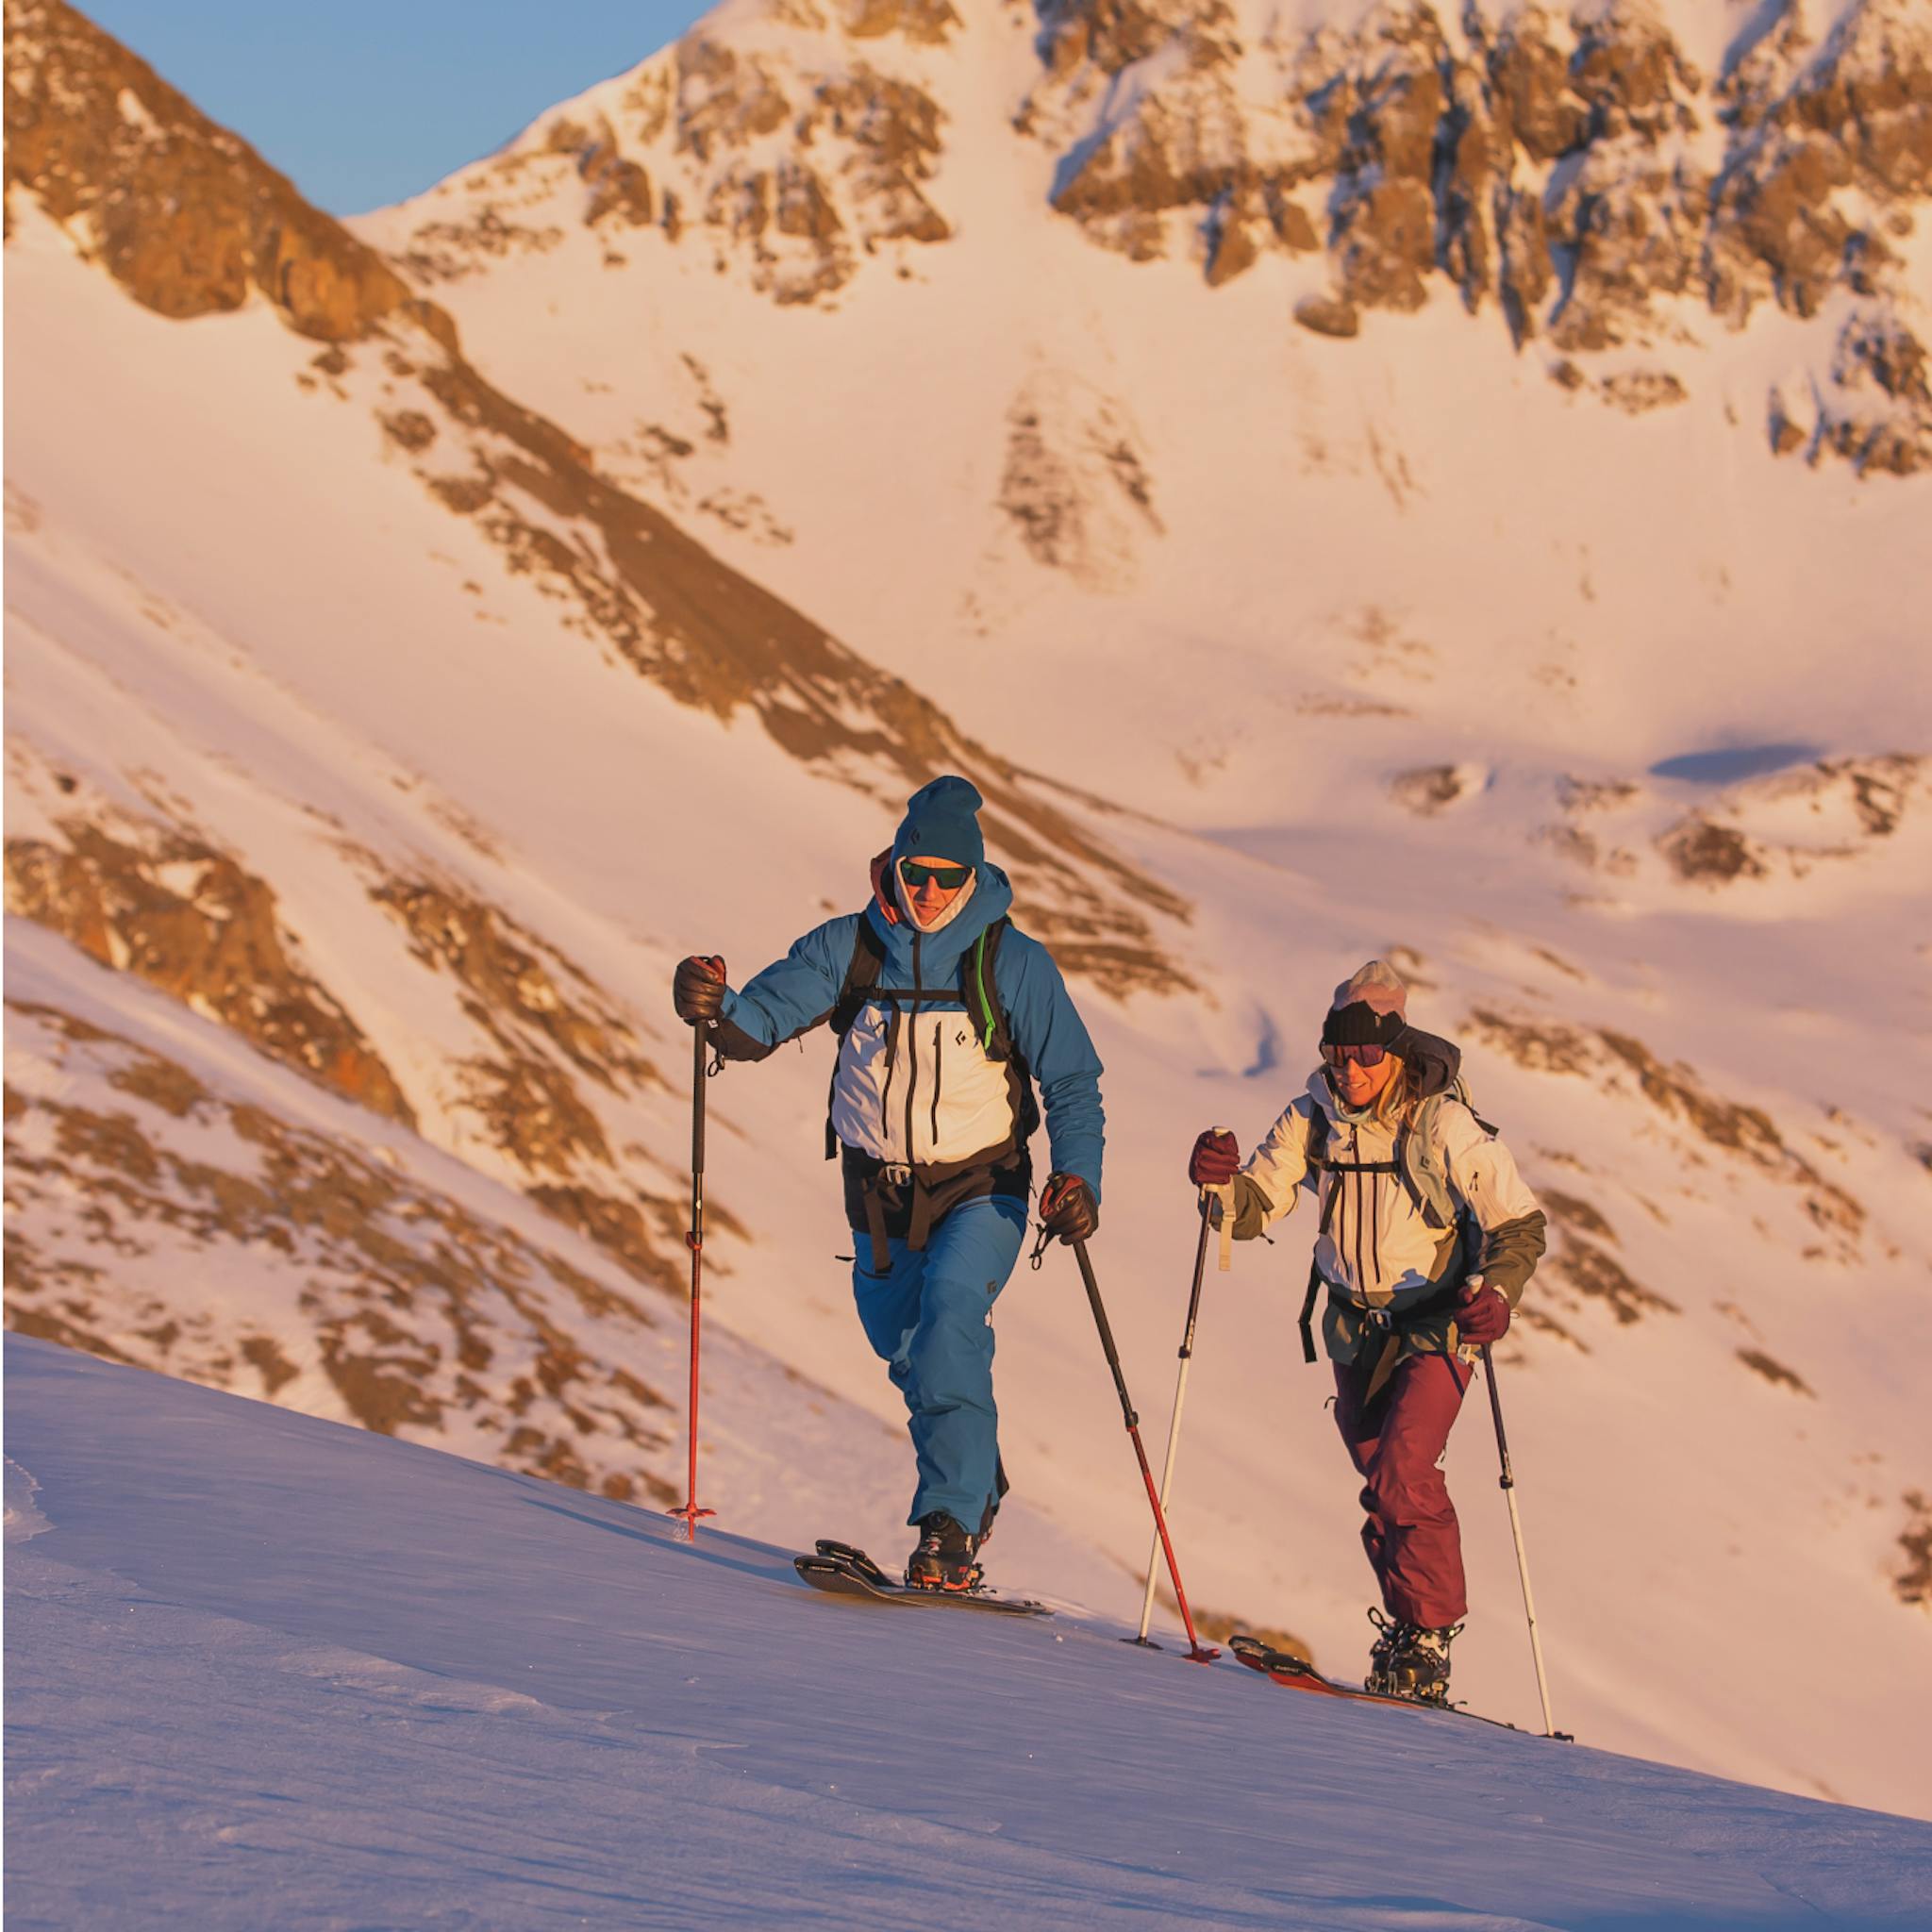 Two backcountry skiers out for a dawn patrol.